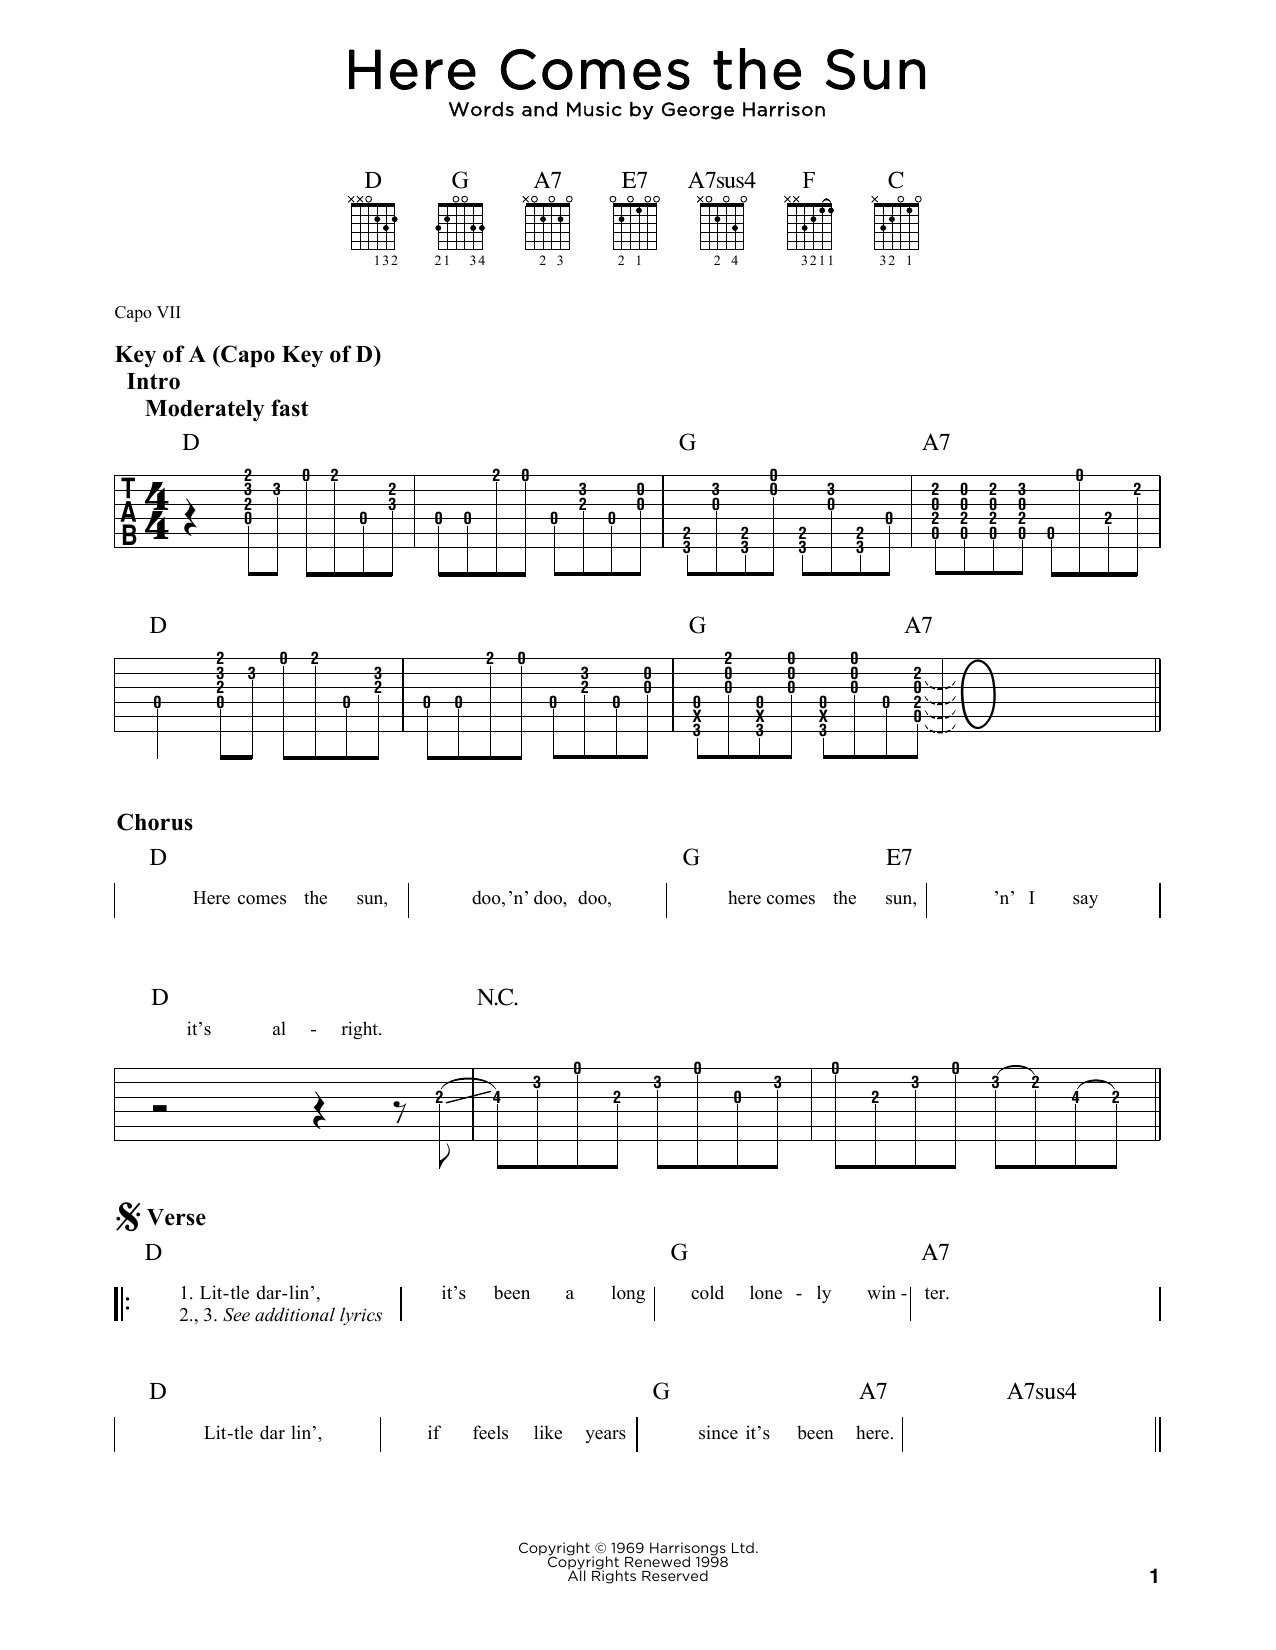 Download The Beatles Here Comes The Sun Sheet Music